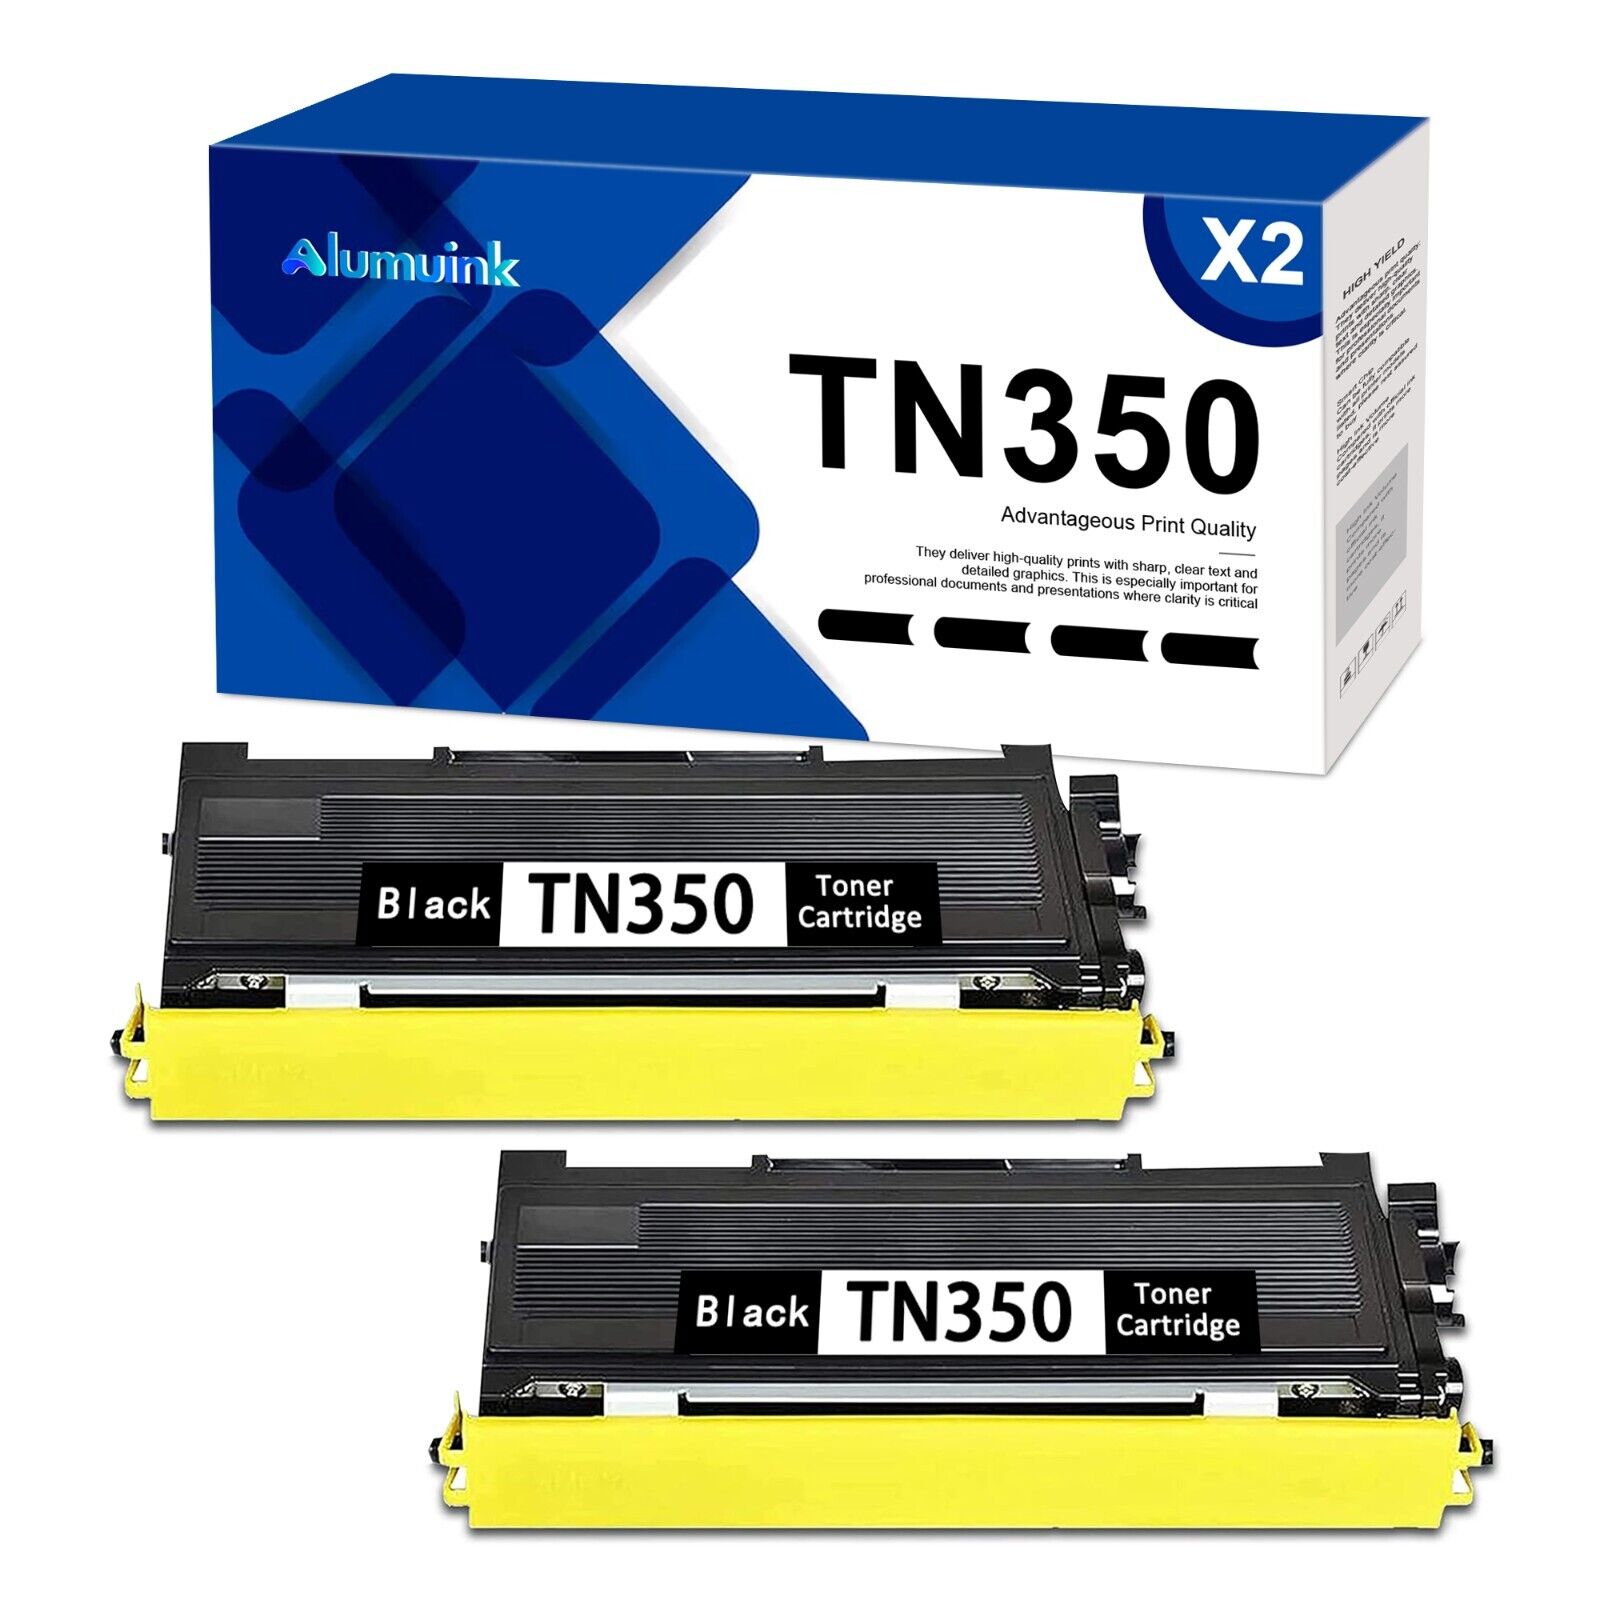 TN350 High Yield Toner Cartridge Replacement for Brother Page Up To 3,000 Pages